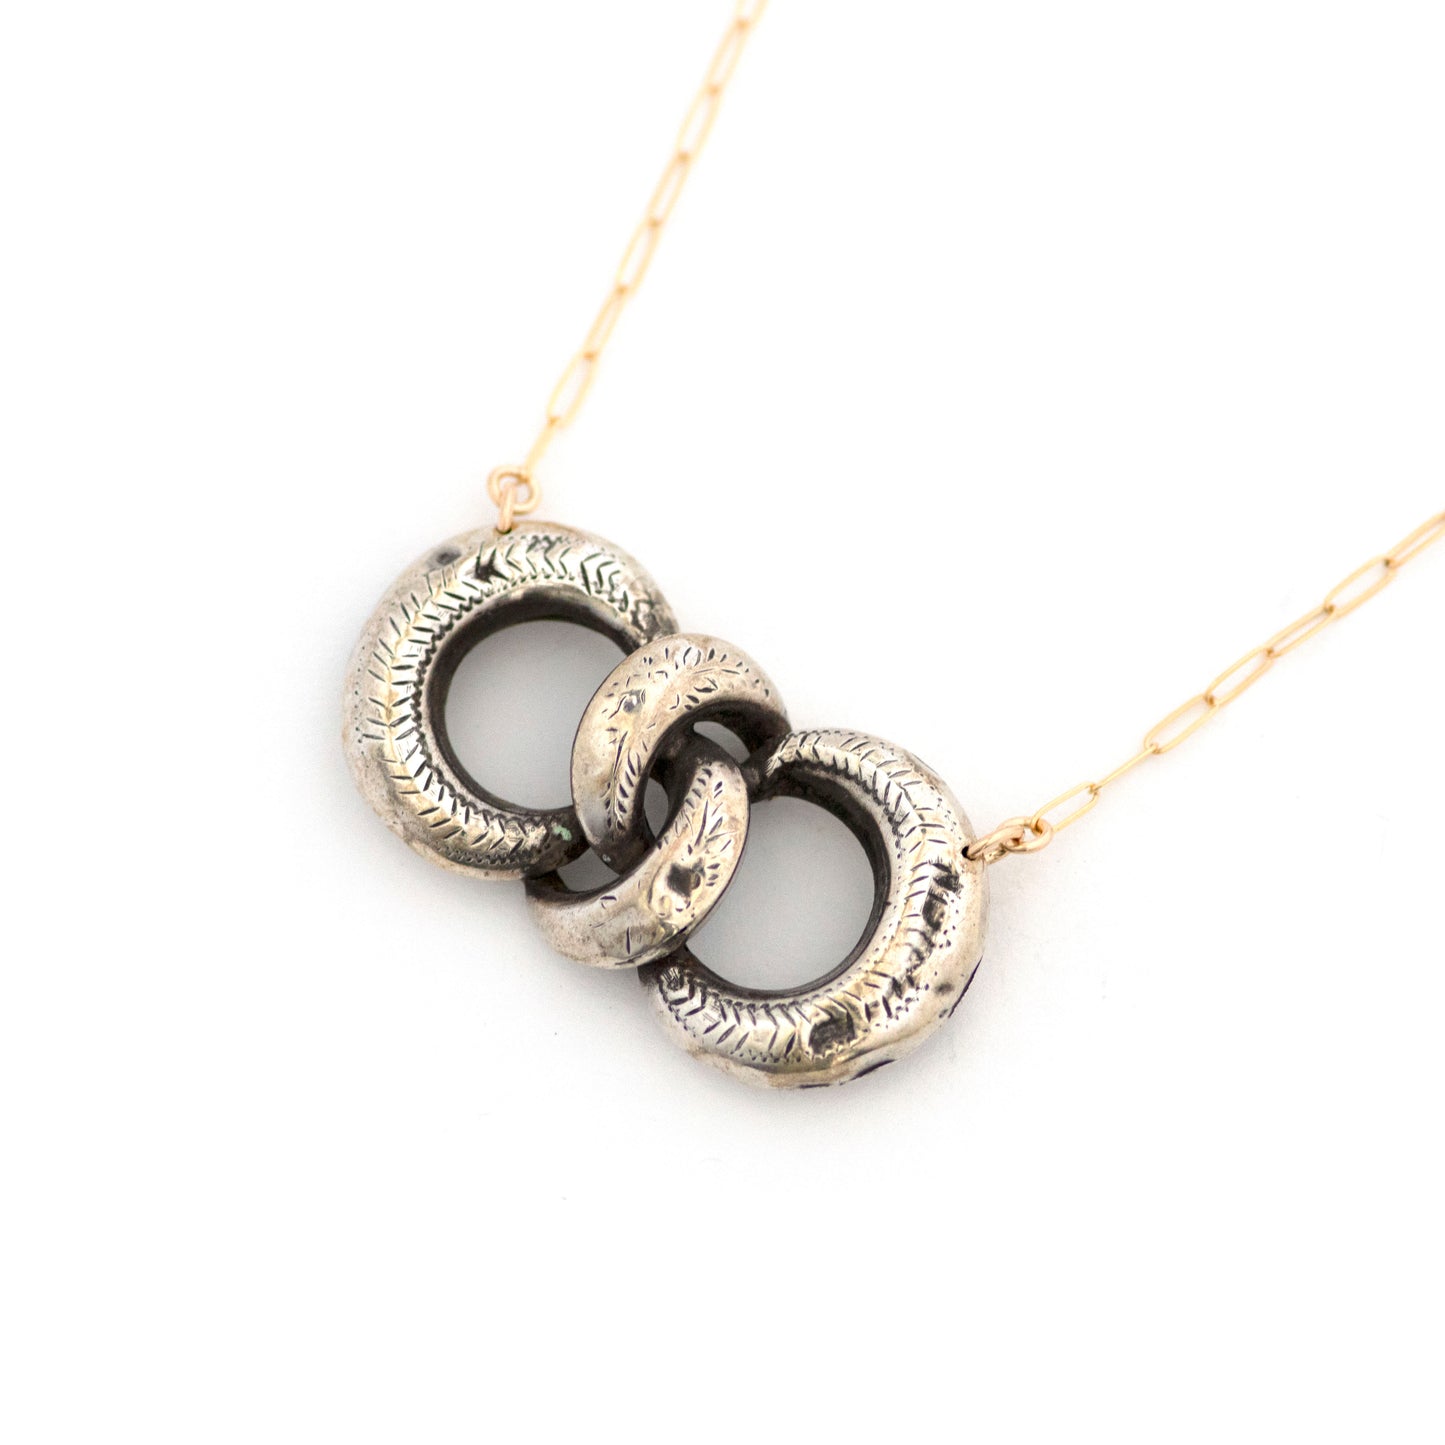 Interweaving Crescent Loops Dress Pin Necklace